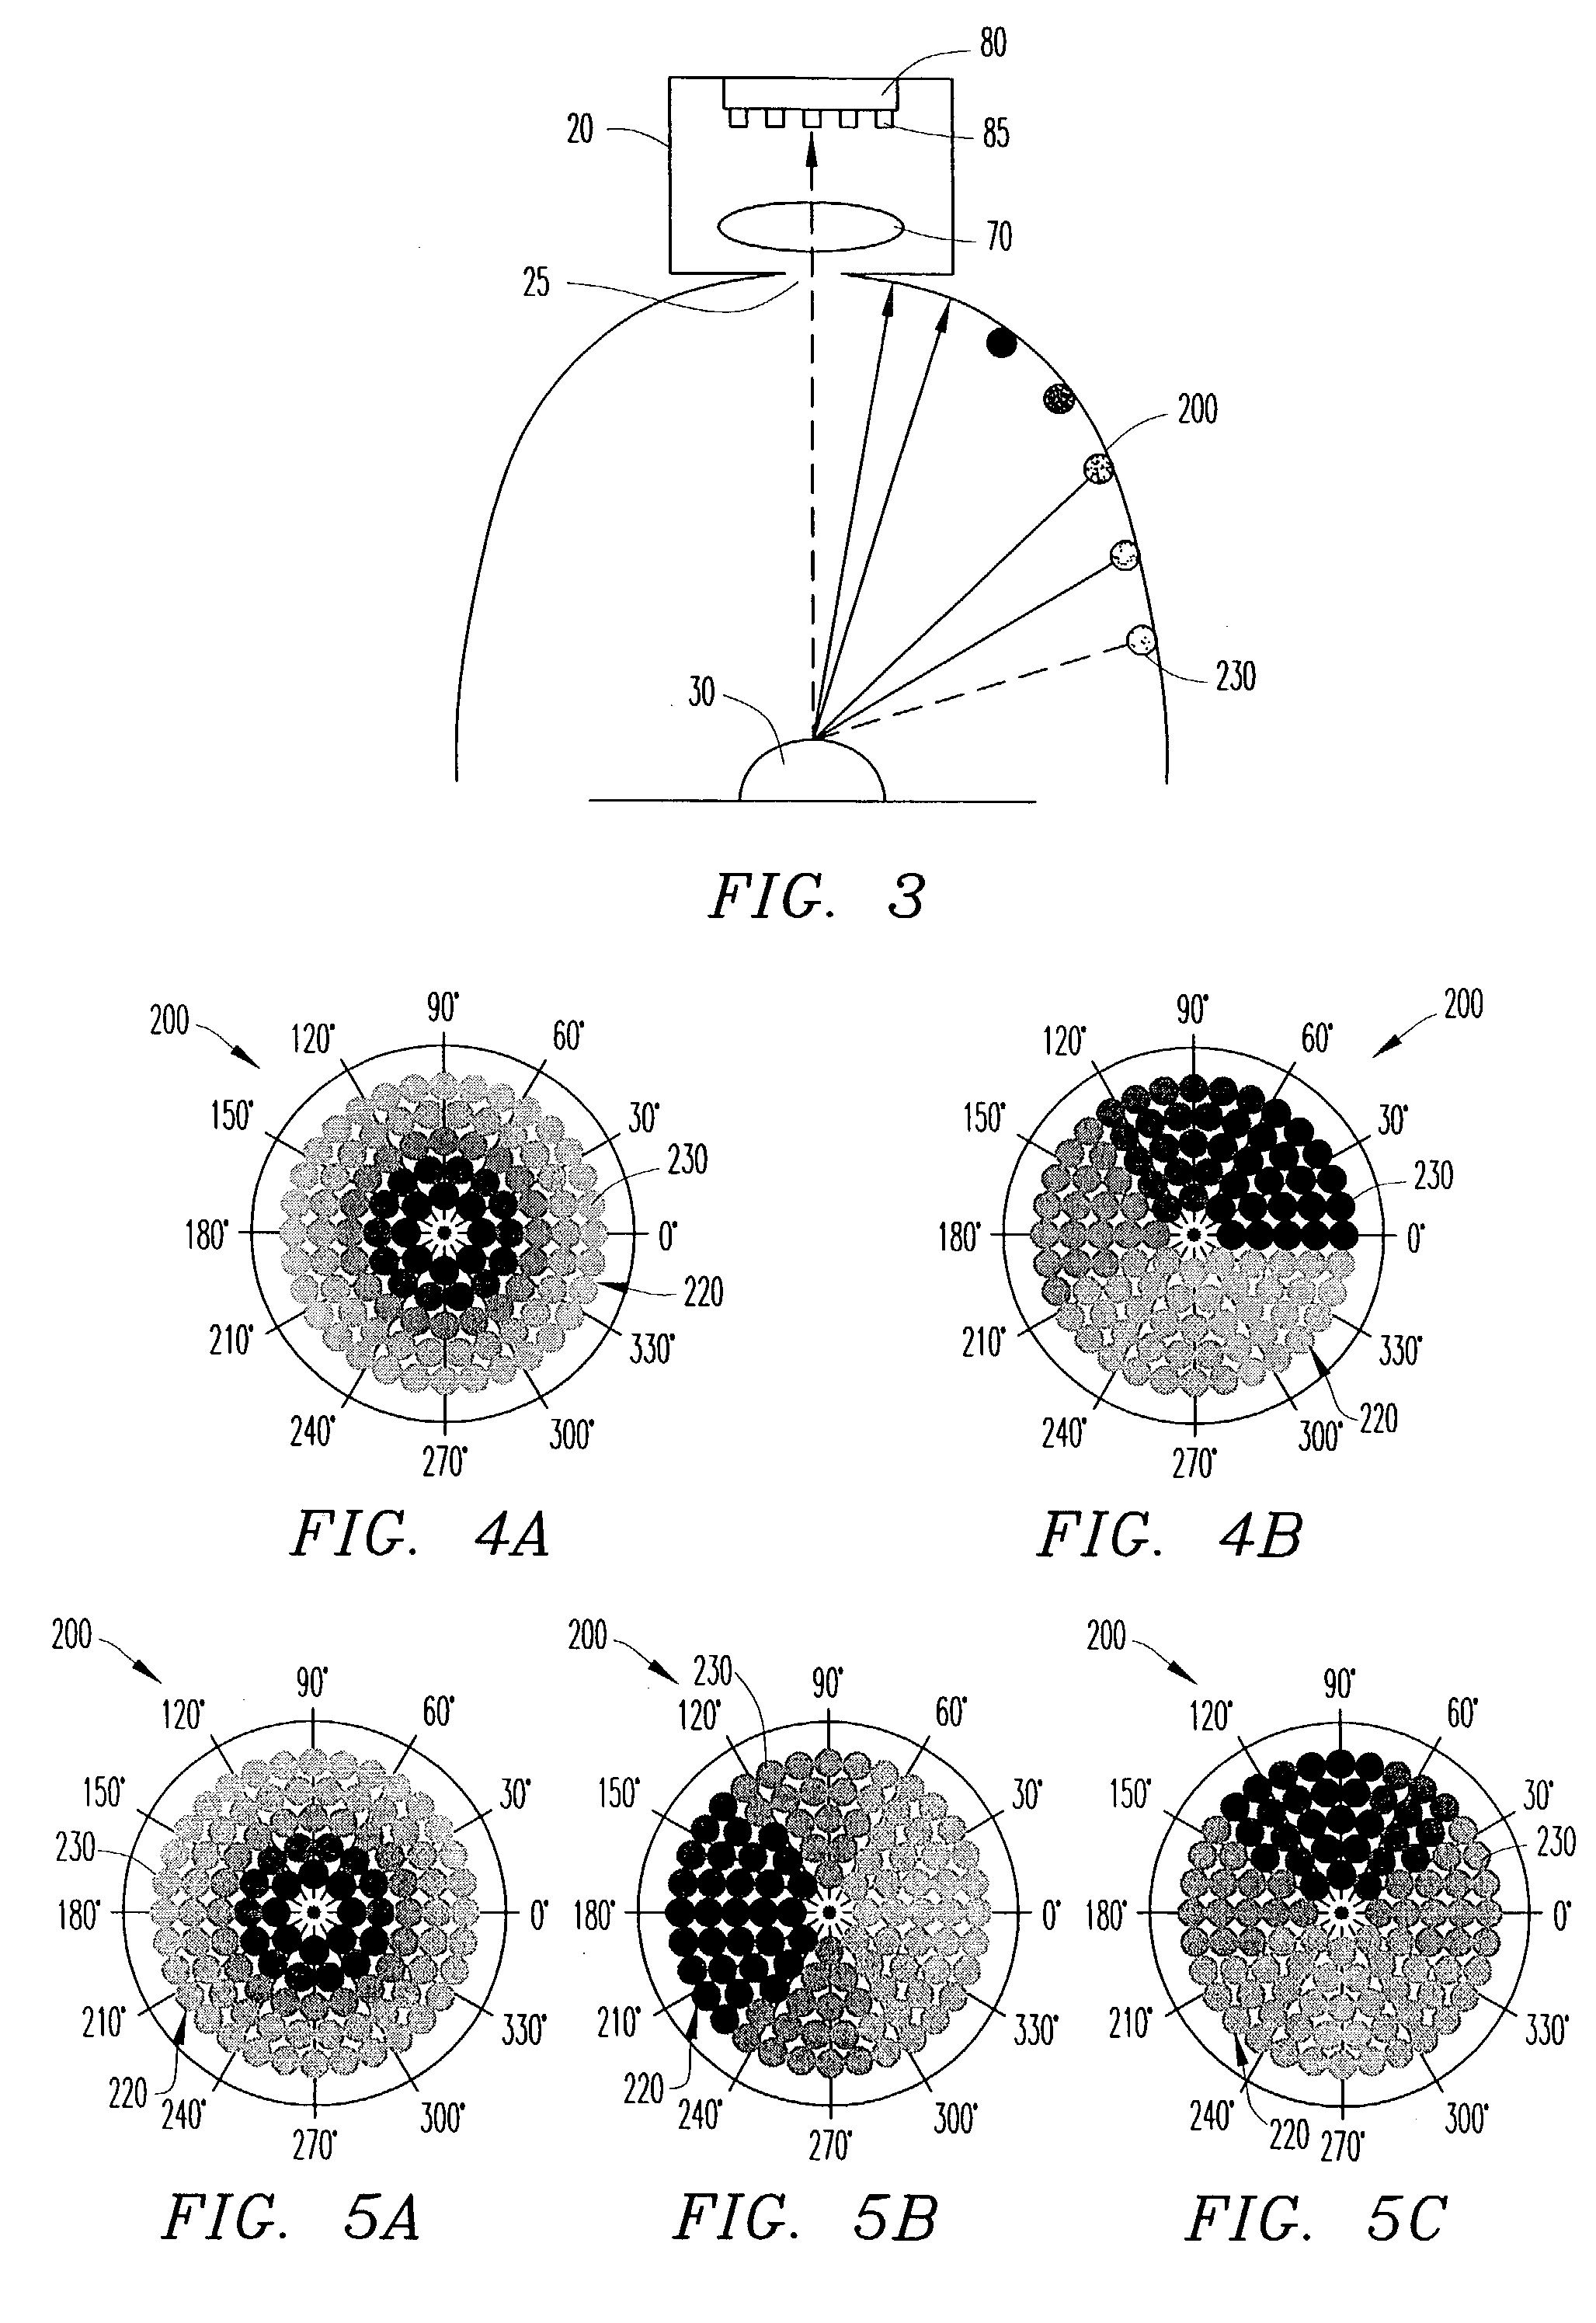 Optical inspection system, apparatus and method for reconstructing three-dimensional images for printed circuit board and electronics manufacturing inspection